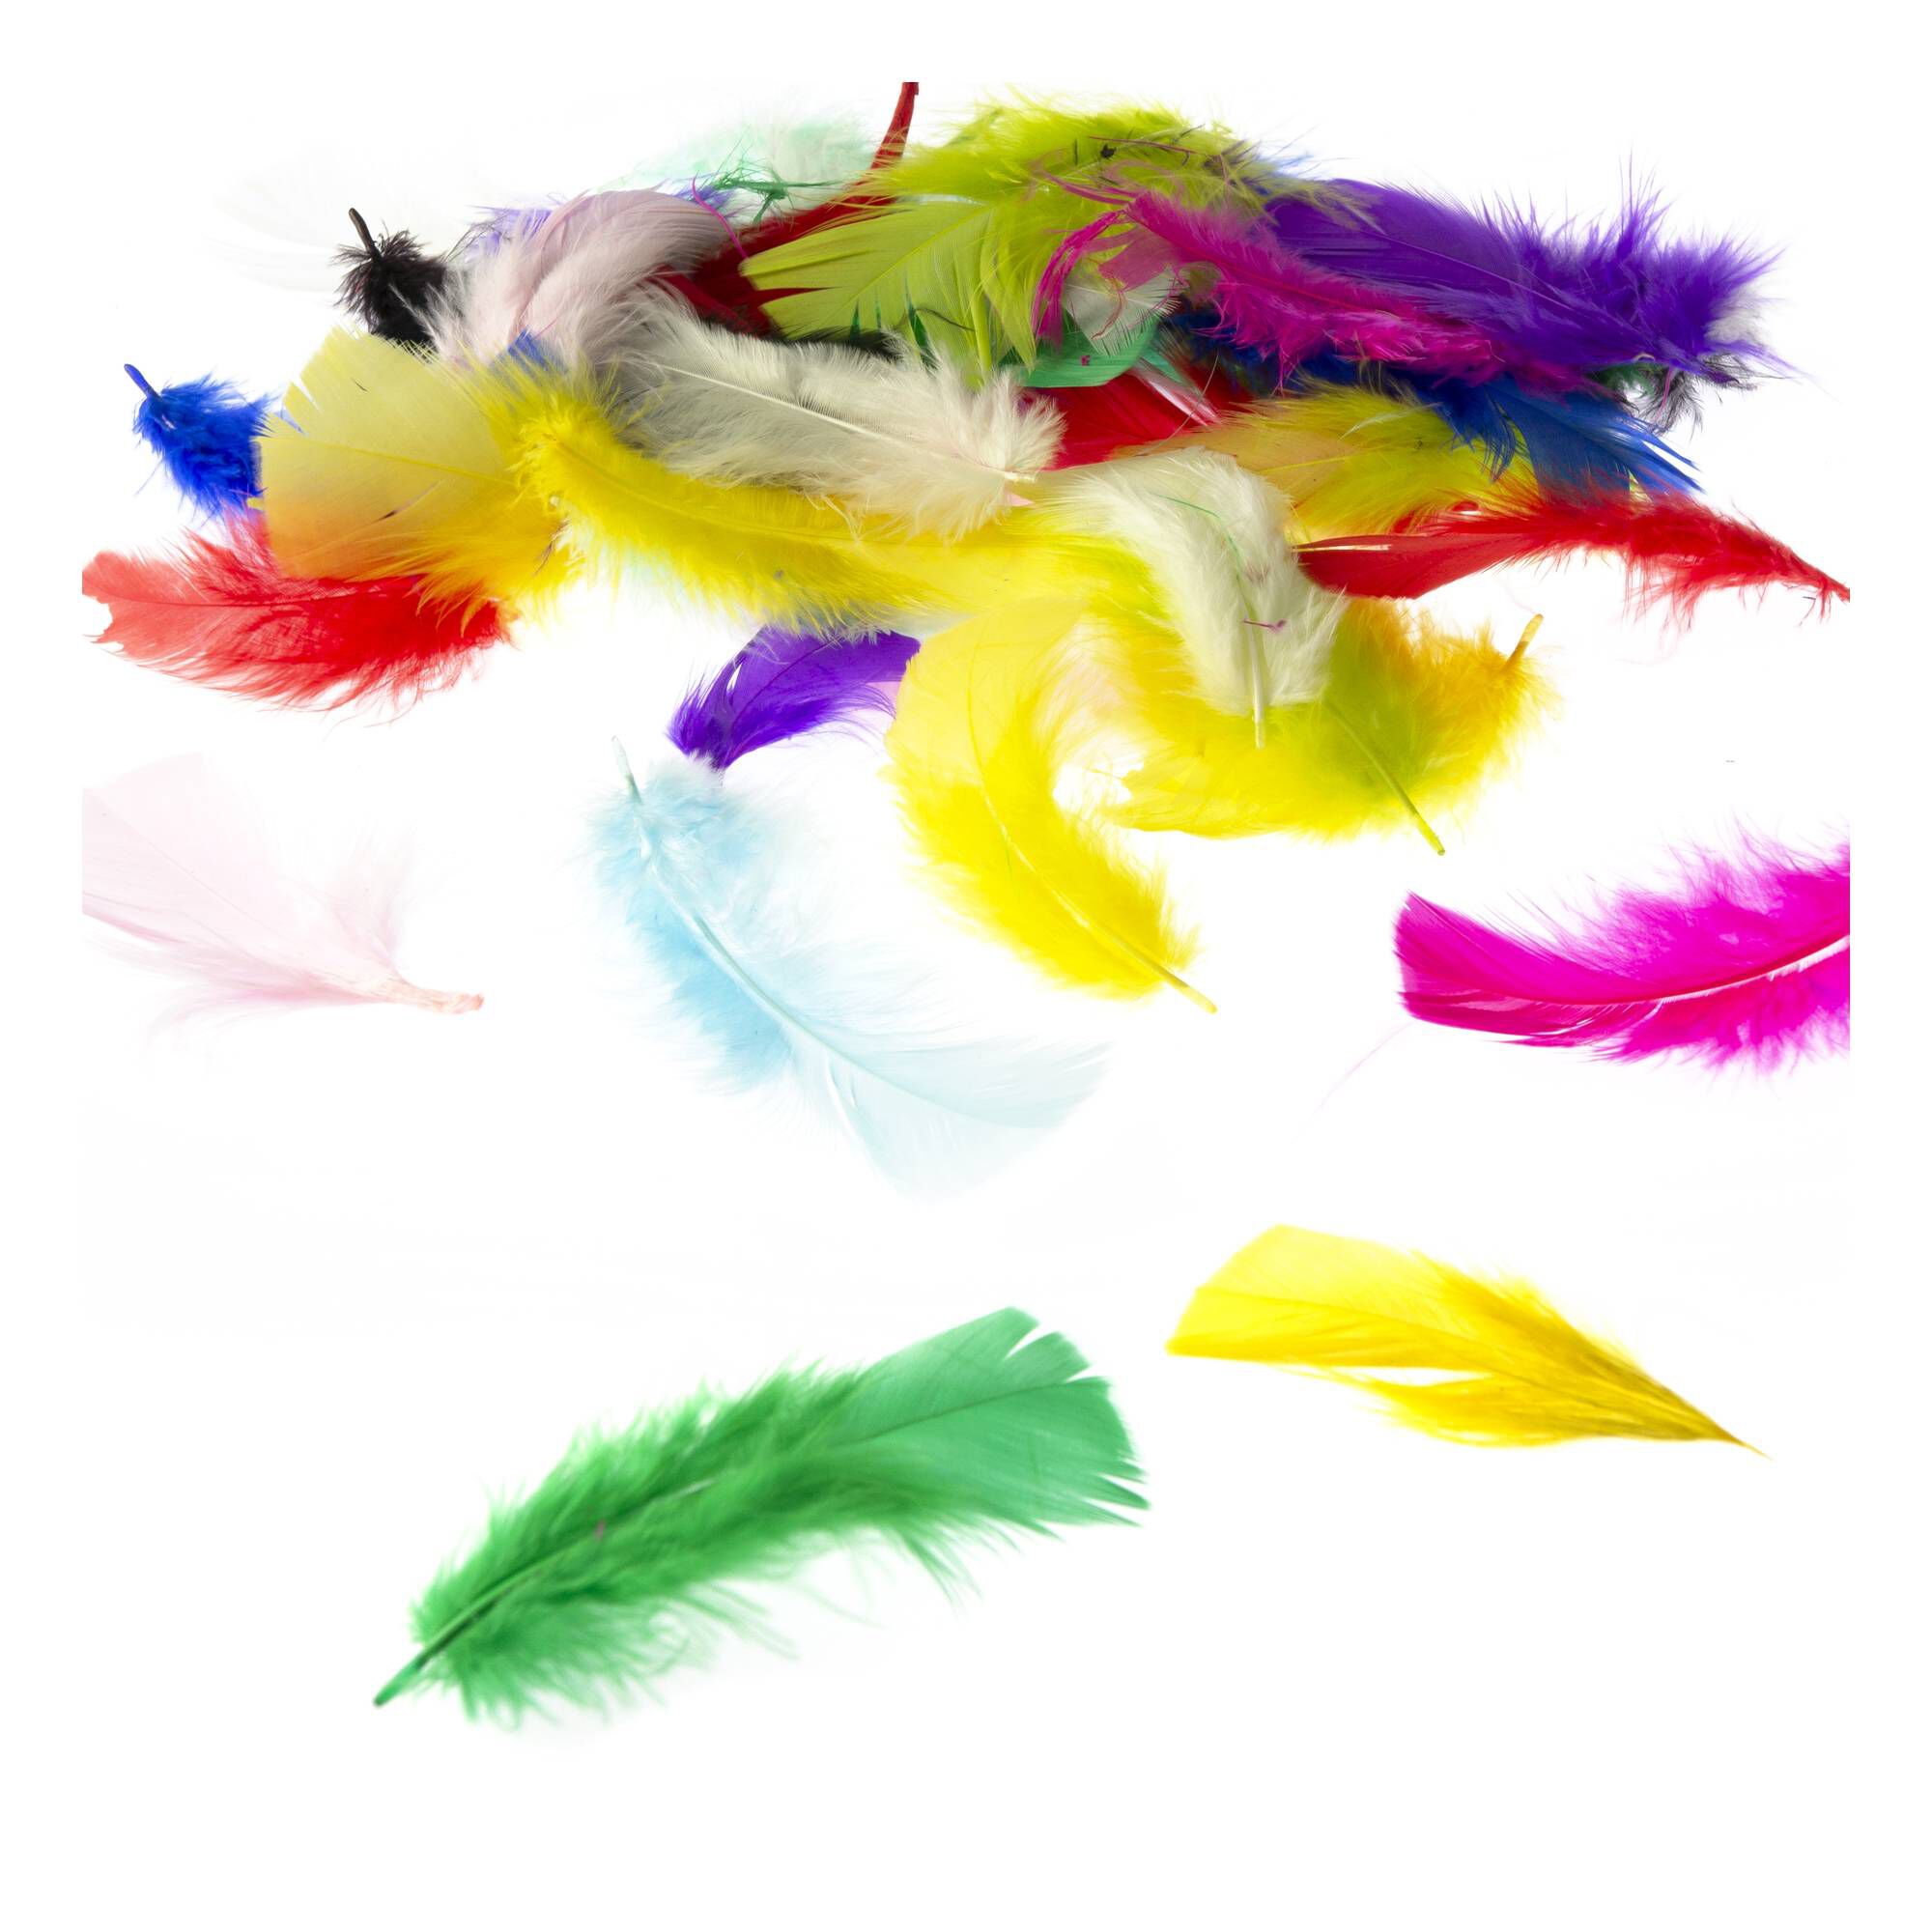 Peacock Feathers 100 Pieces Natural Feather Handmade Craft Feathers Bulk  for DIY Earring Wings Dream Catcher Crafts Activities Project Wedding Party